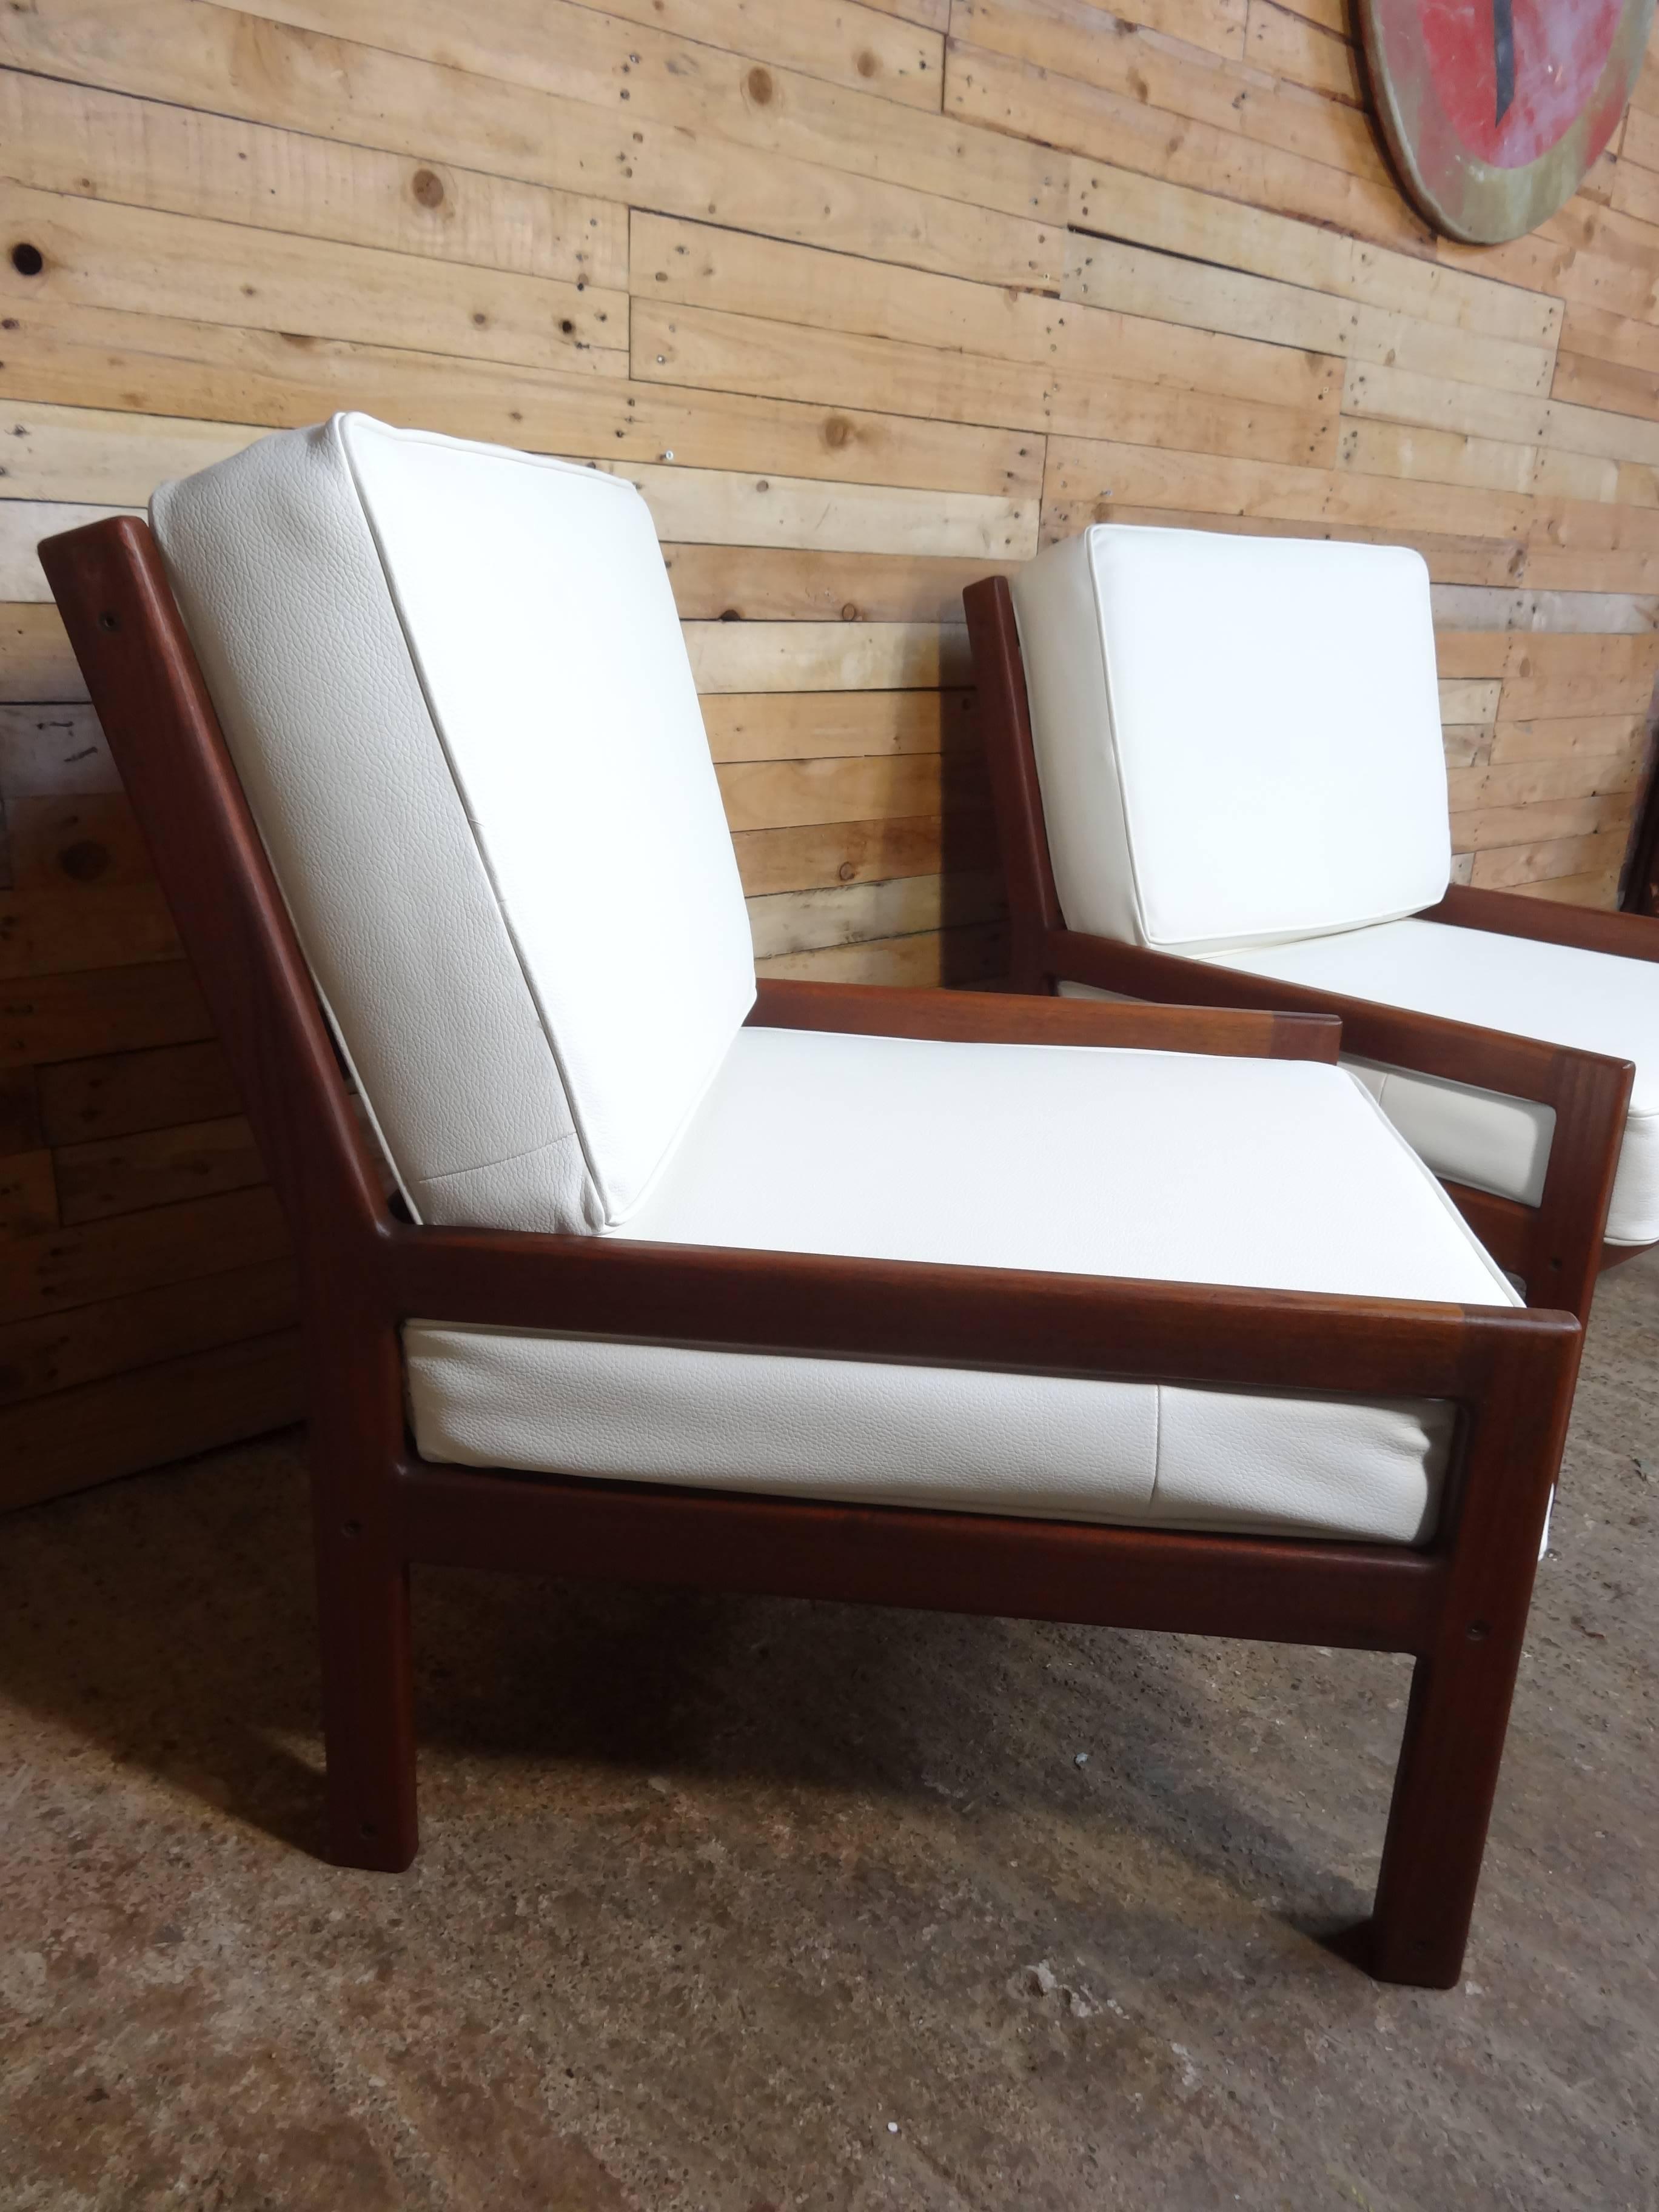 1960 Set of Retro White Leather Minimalistic Teak Lounge Chairs In Good Condition For Sale In Markington, GB